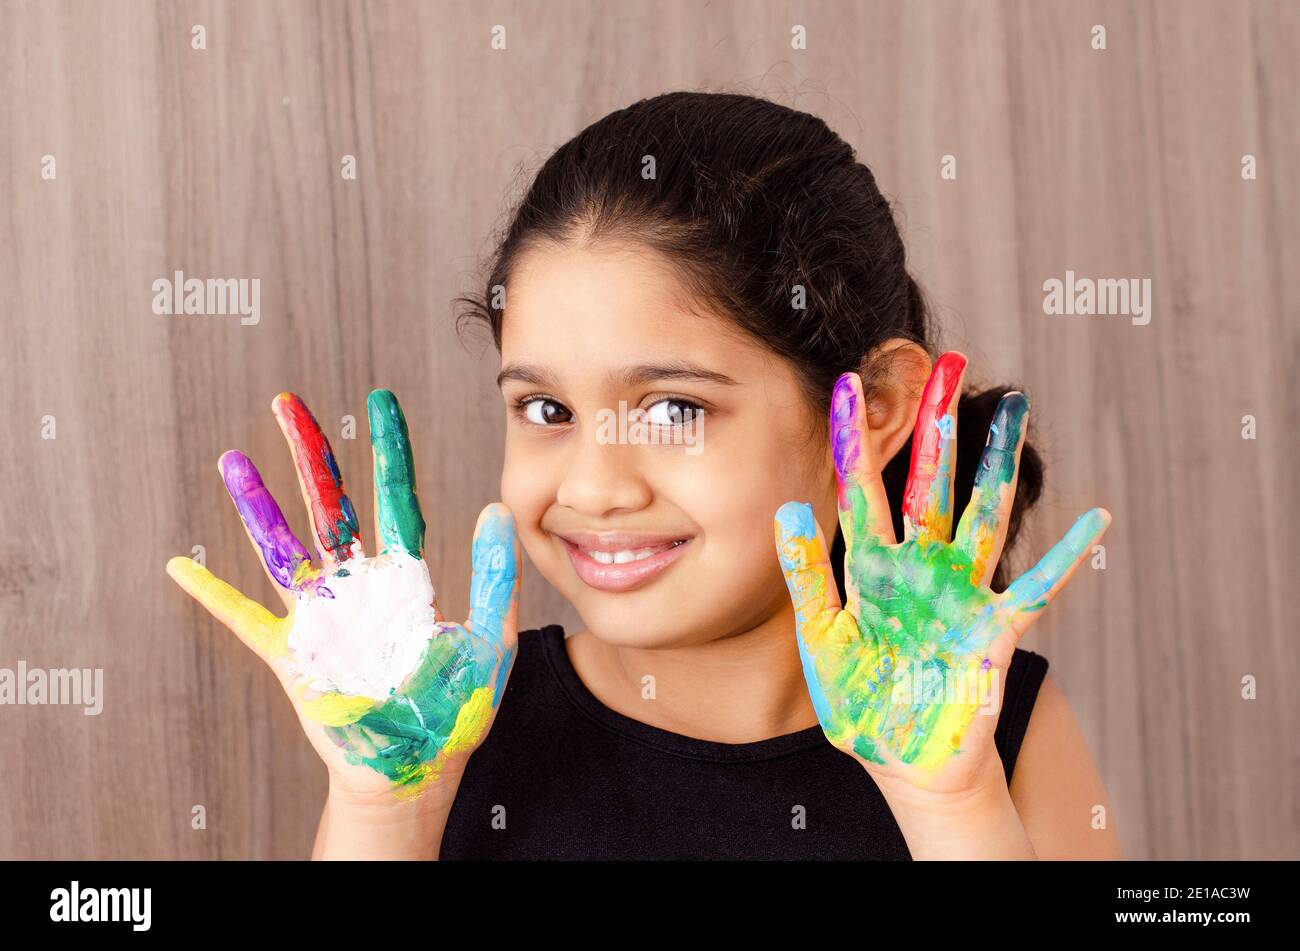 Portrait of a happy and smiling Indian kid having fun by playing with different colored paints in her finger. Stock Photo